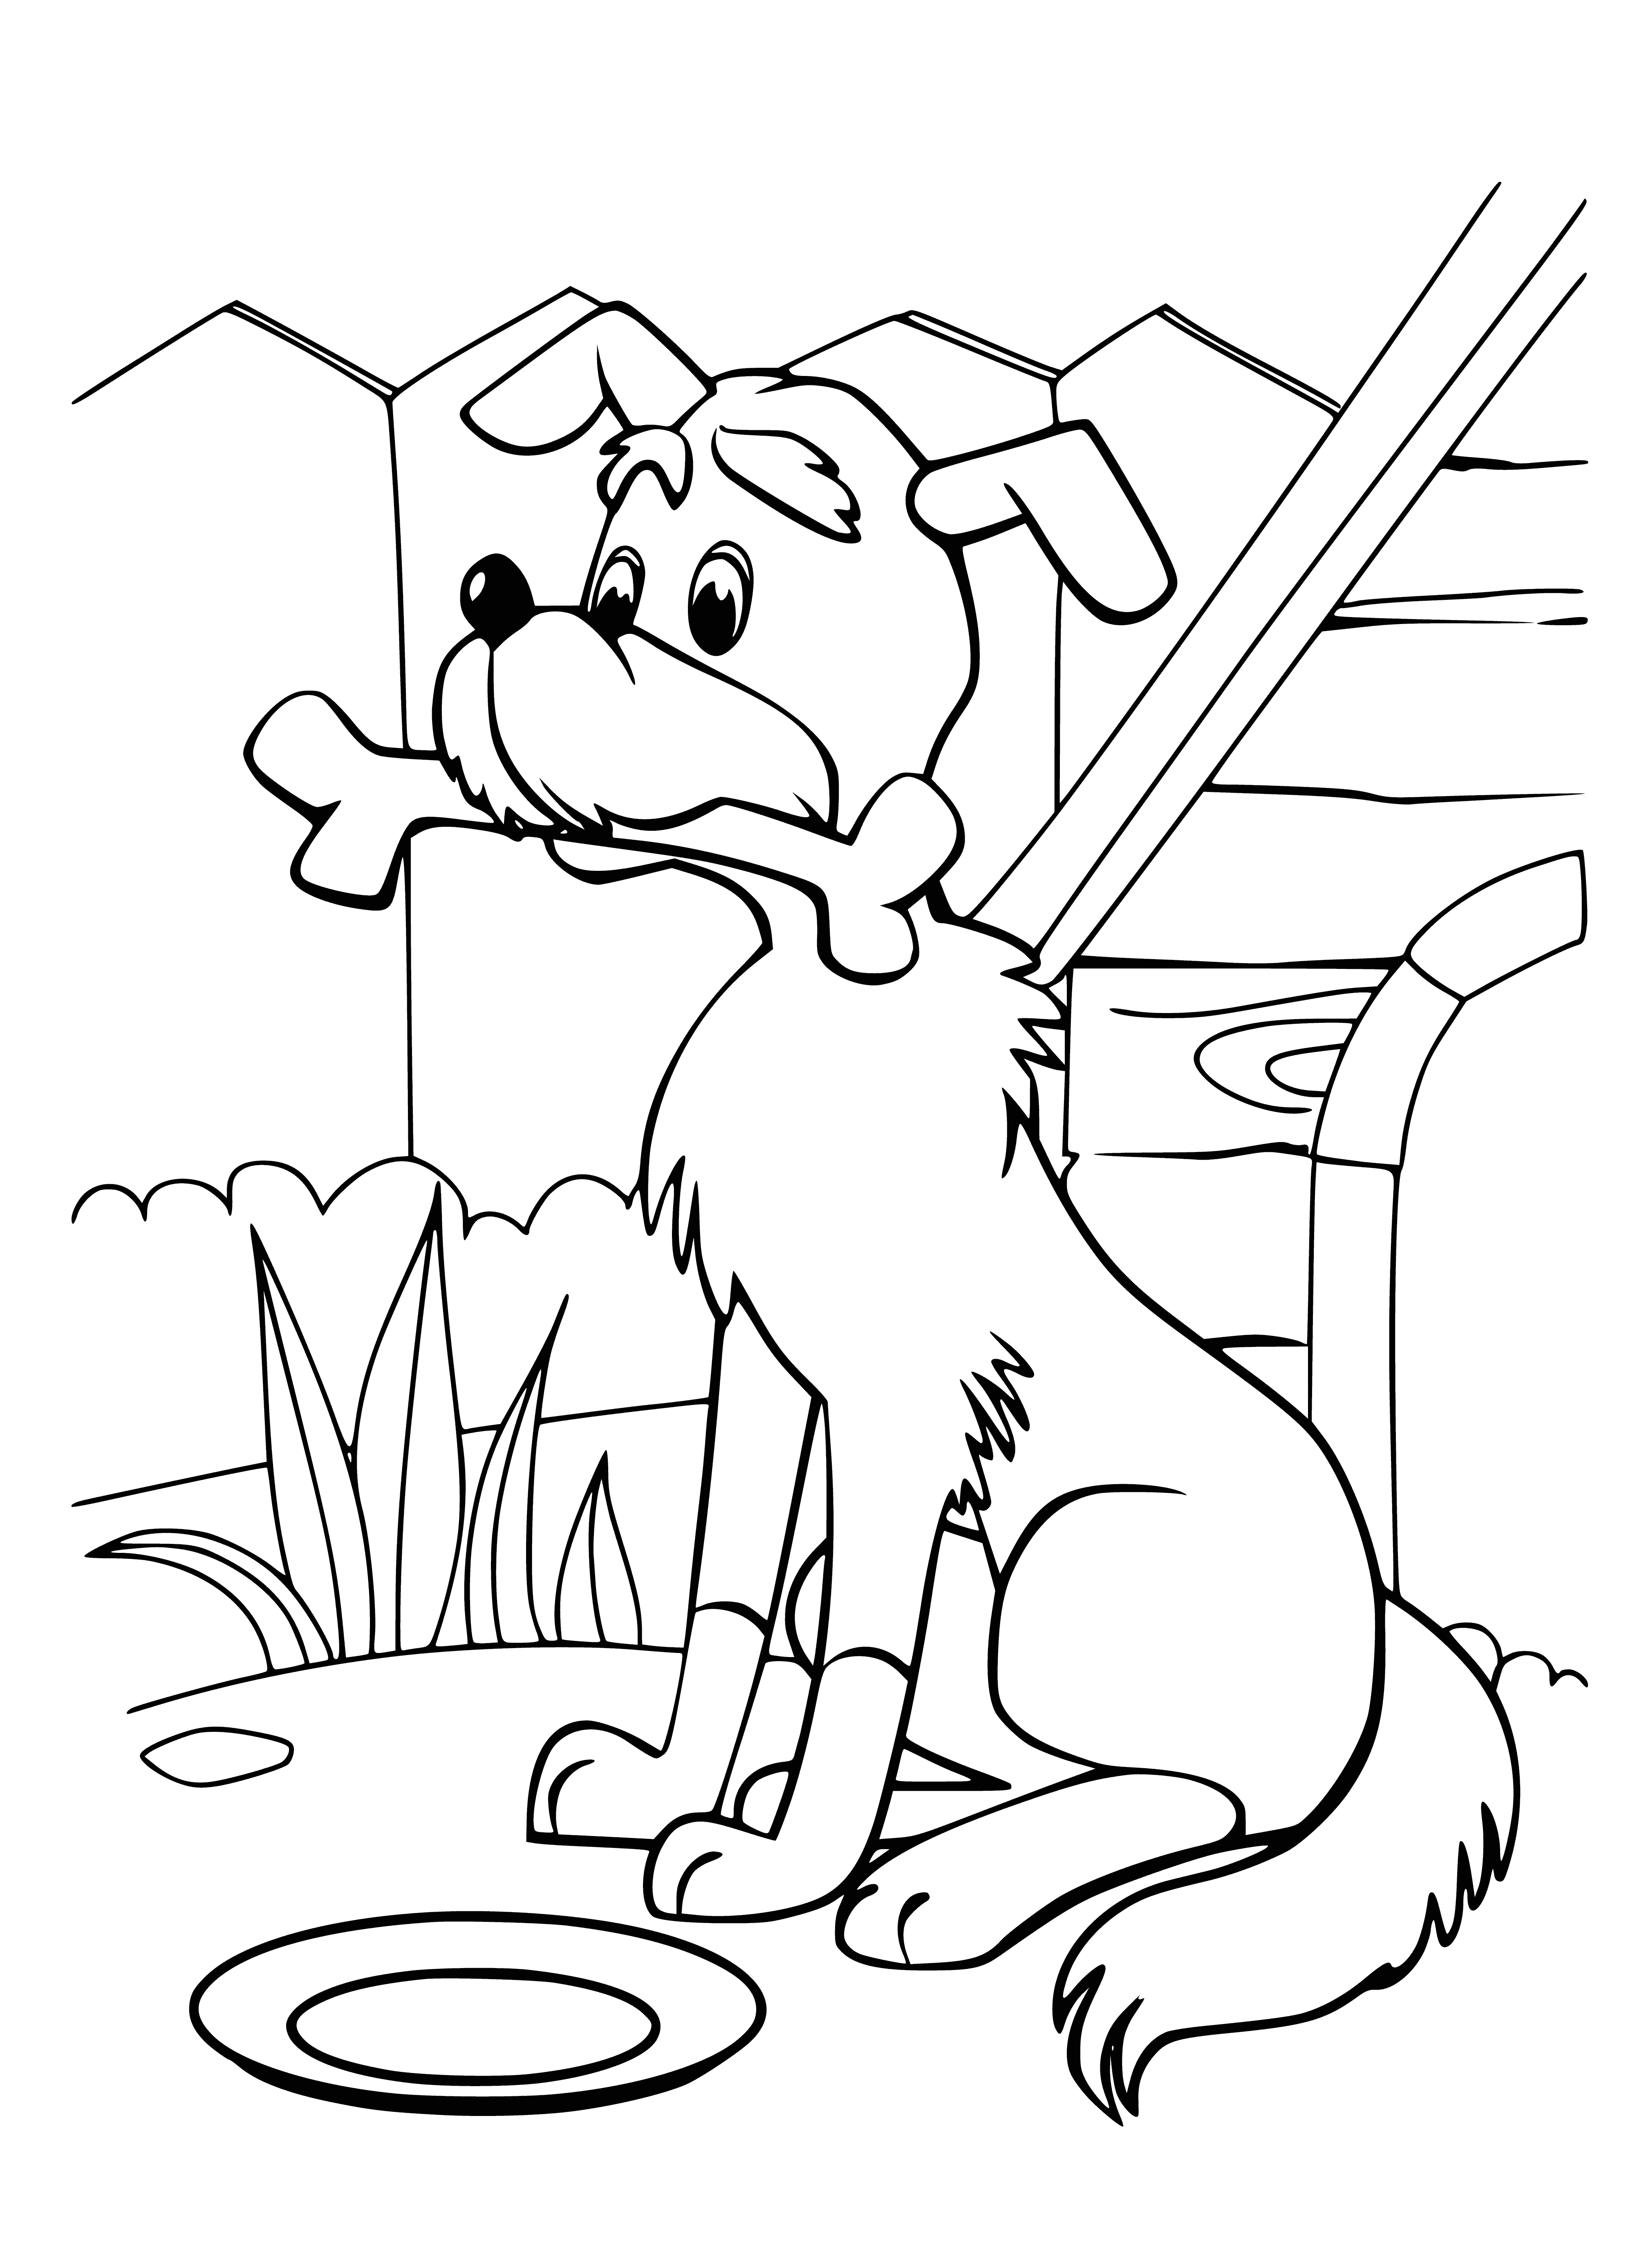 coloring page: Short-haired black and white kitten, Woof, looks curiously into the camera with big blue eyes.